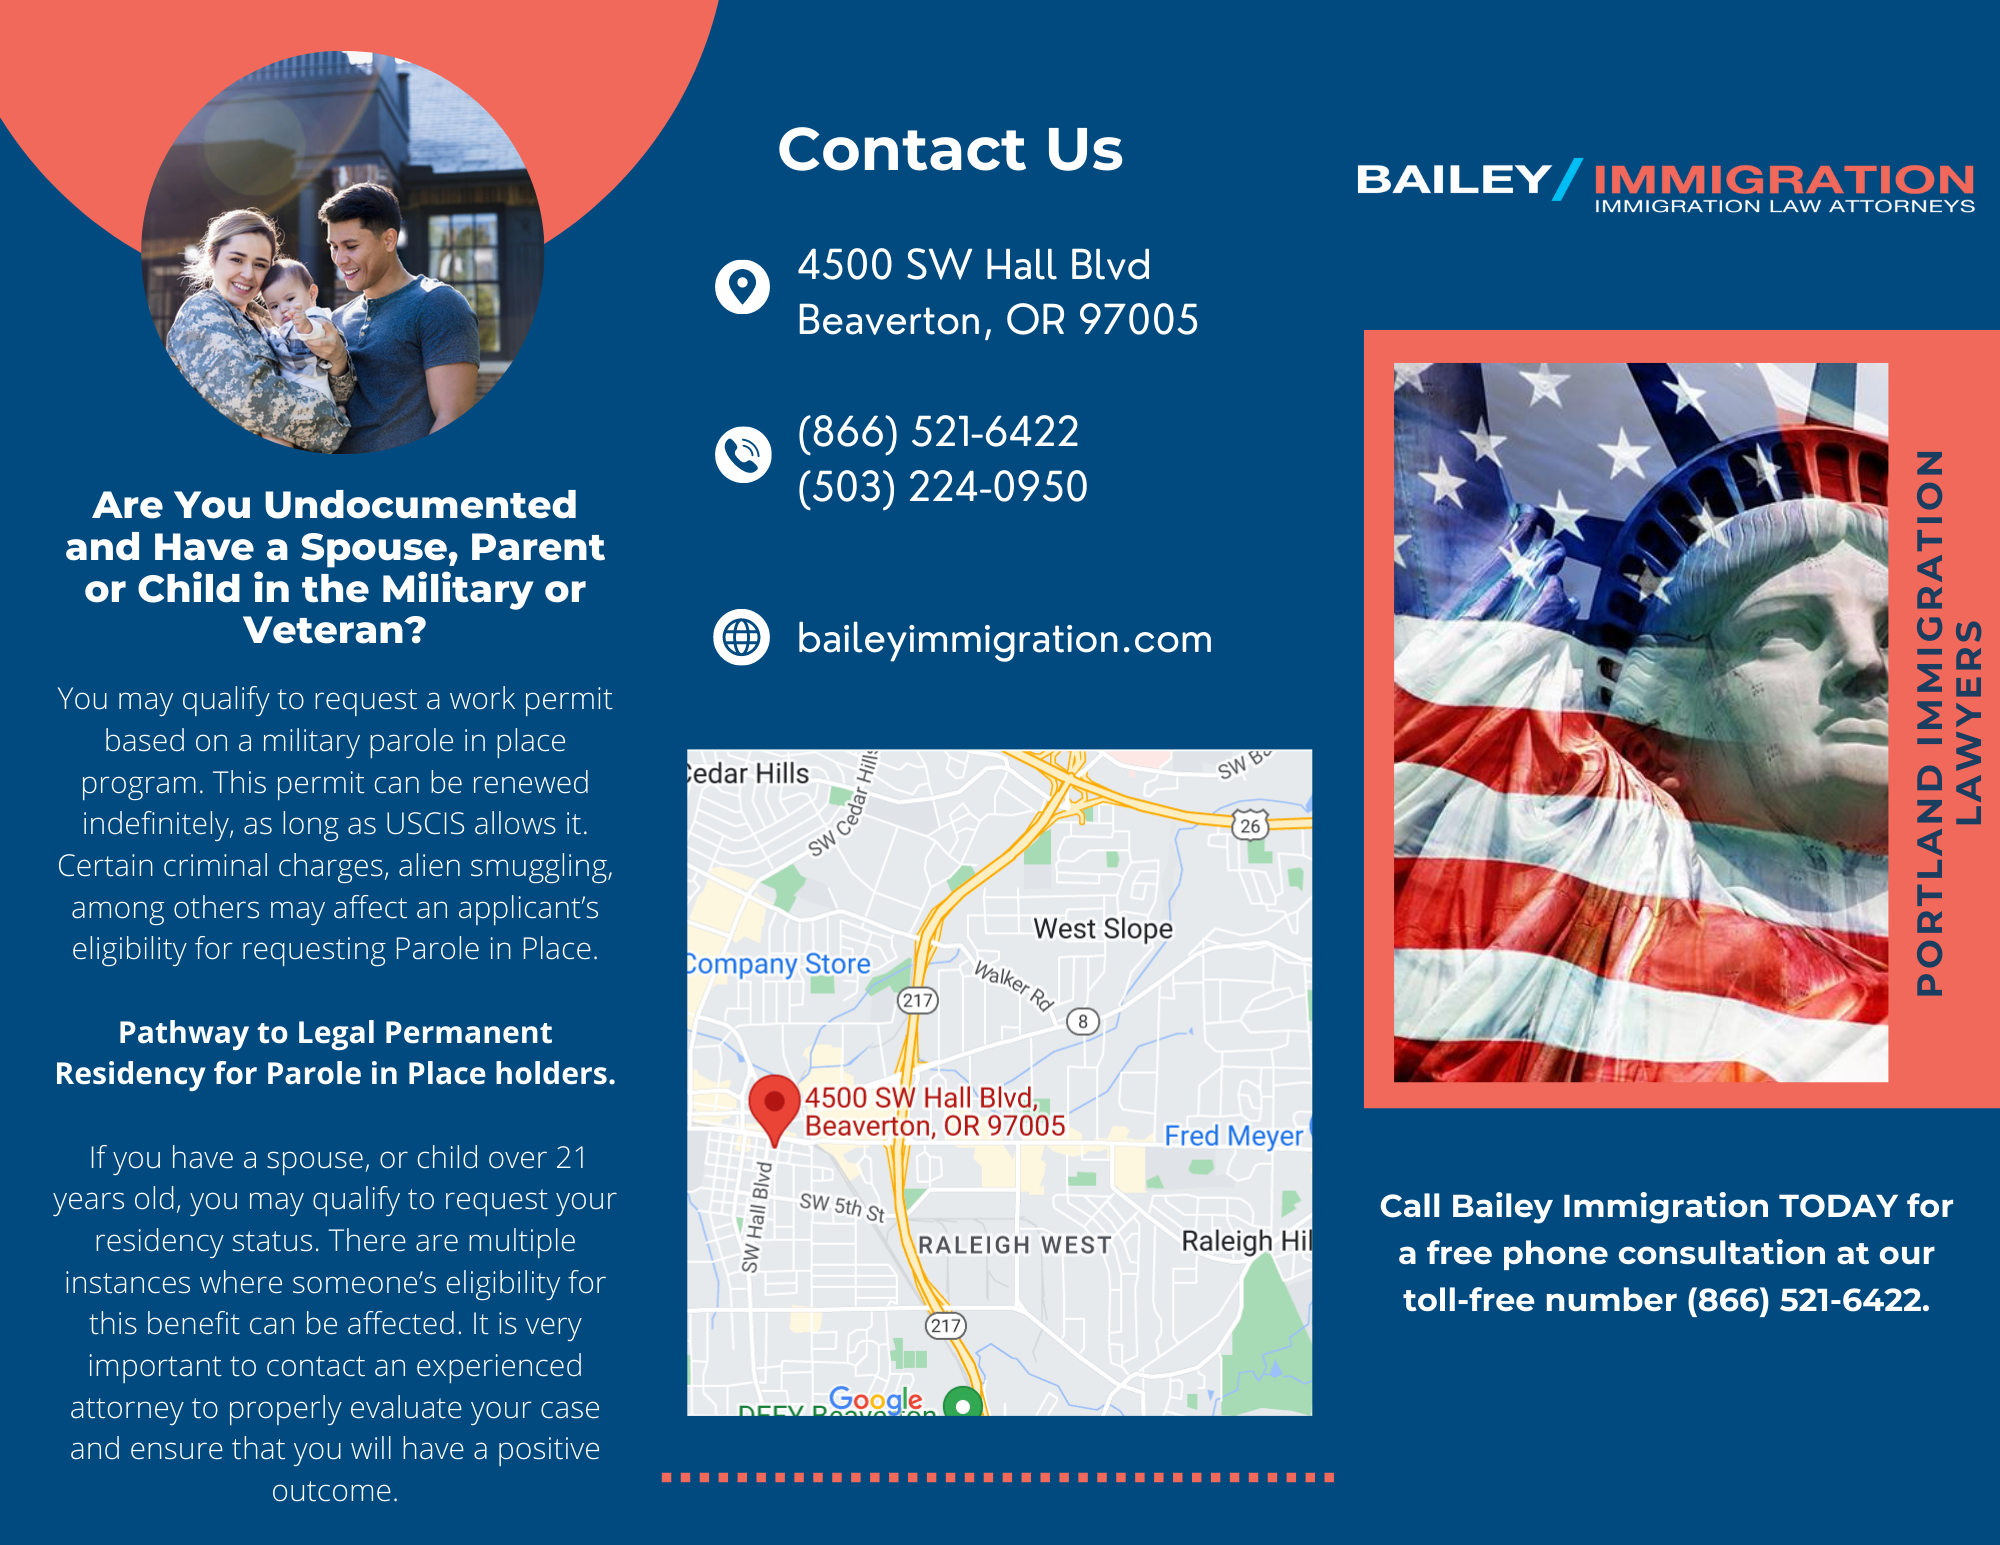 Sharing Ways Bailey Immigration Can Help